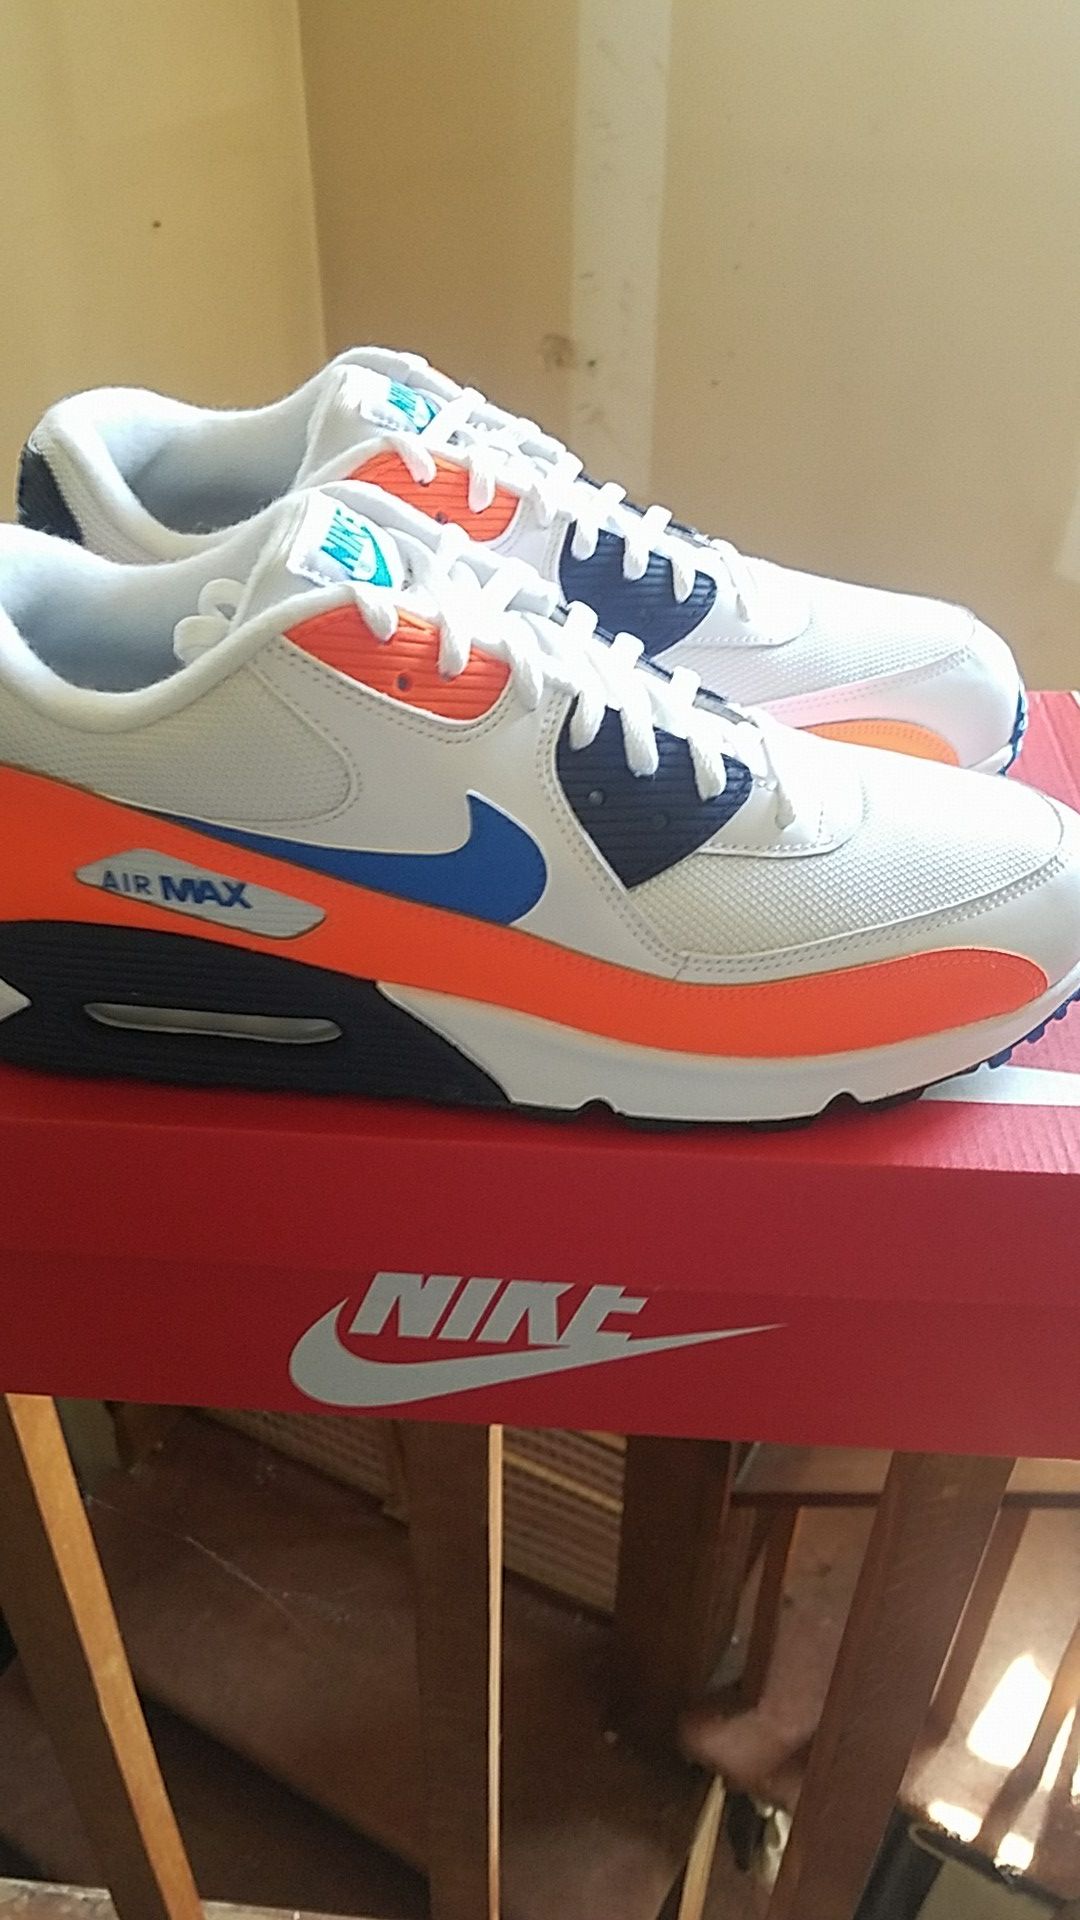 Brand new Nike Air Max shoes